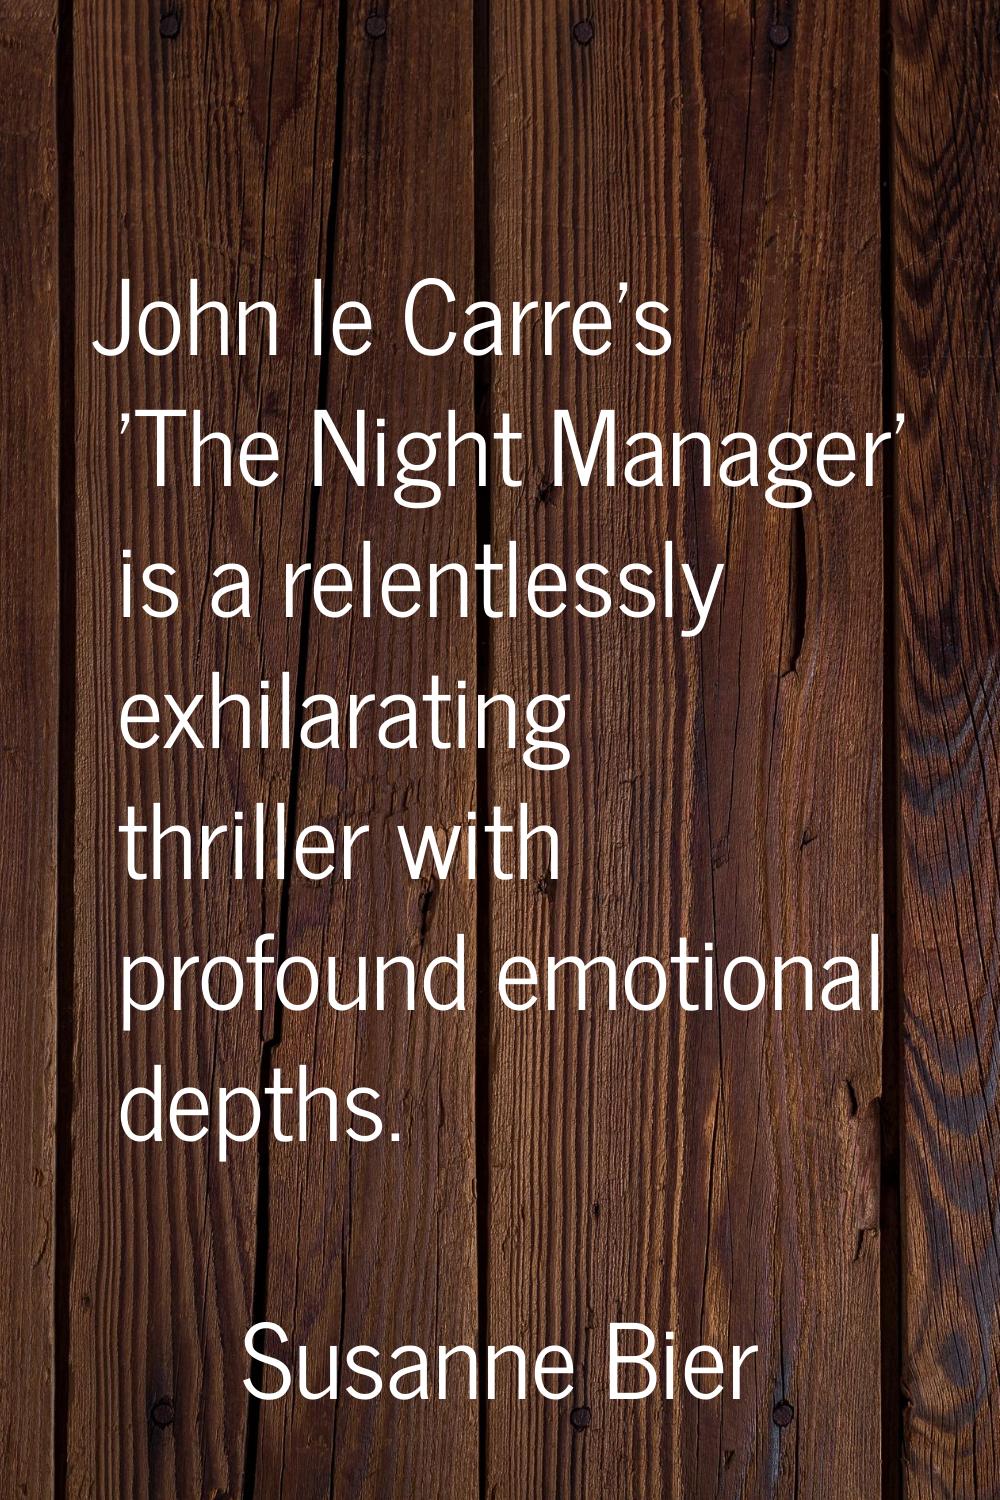 John le Carre's 'The Night Manager' is a relentlessly exhilarating thriller with profound emotional